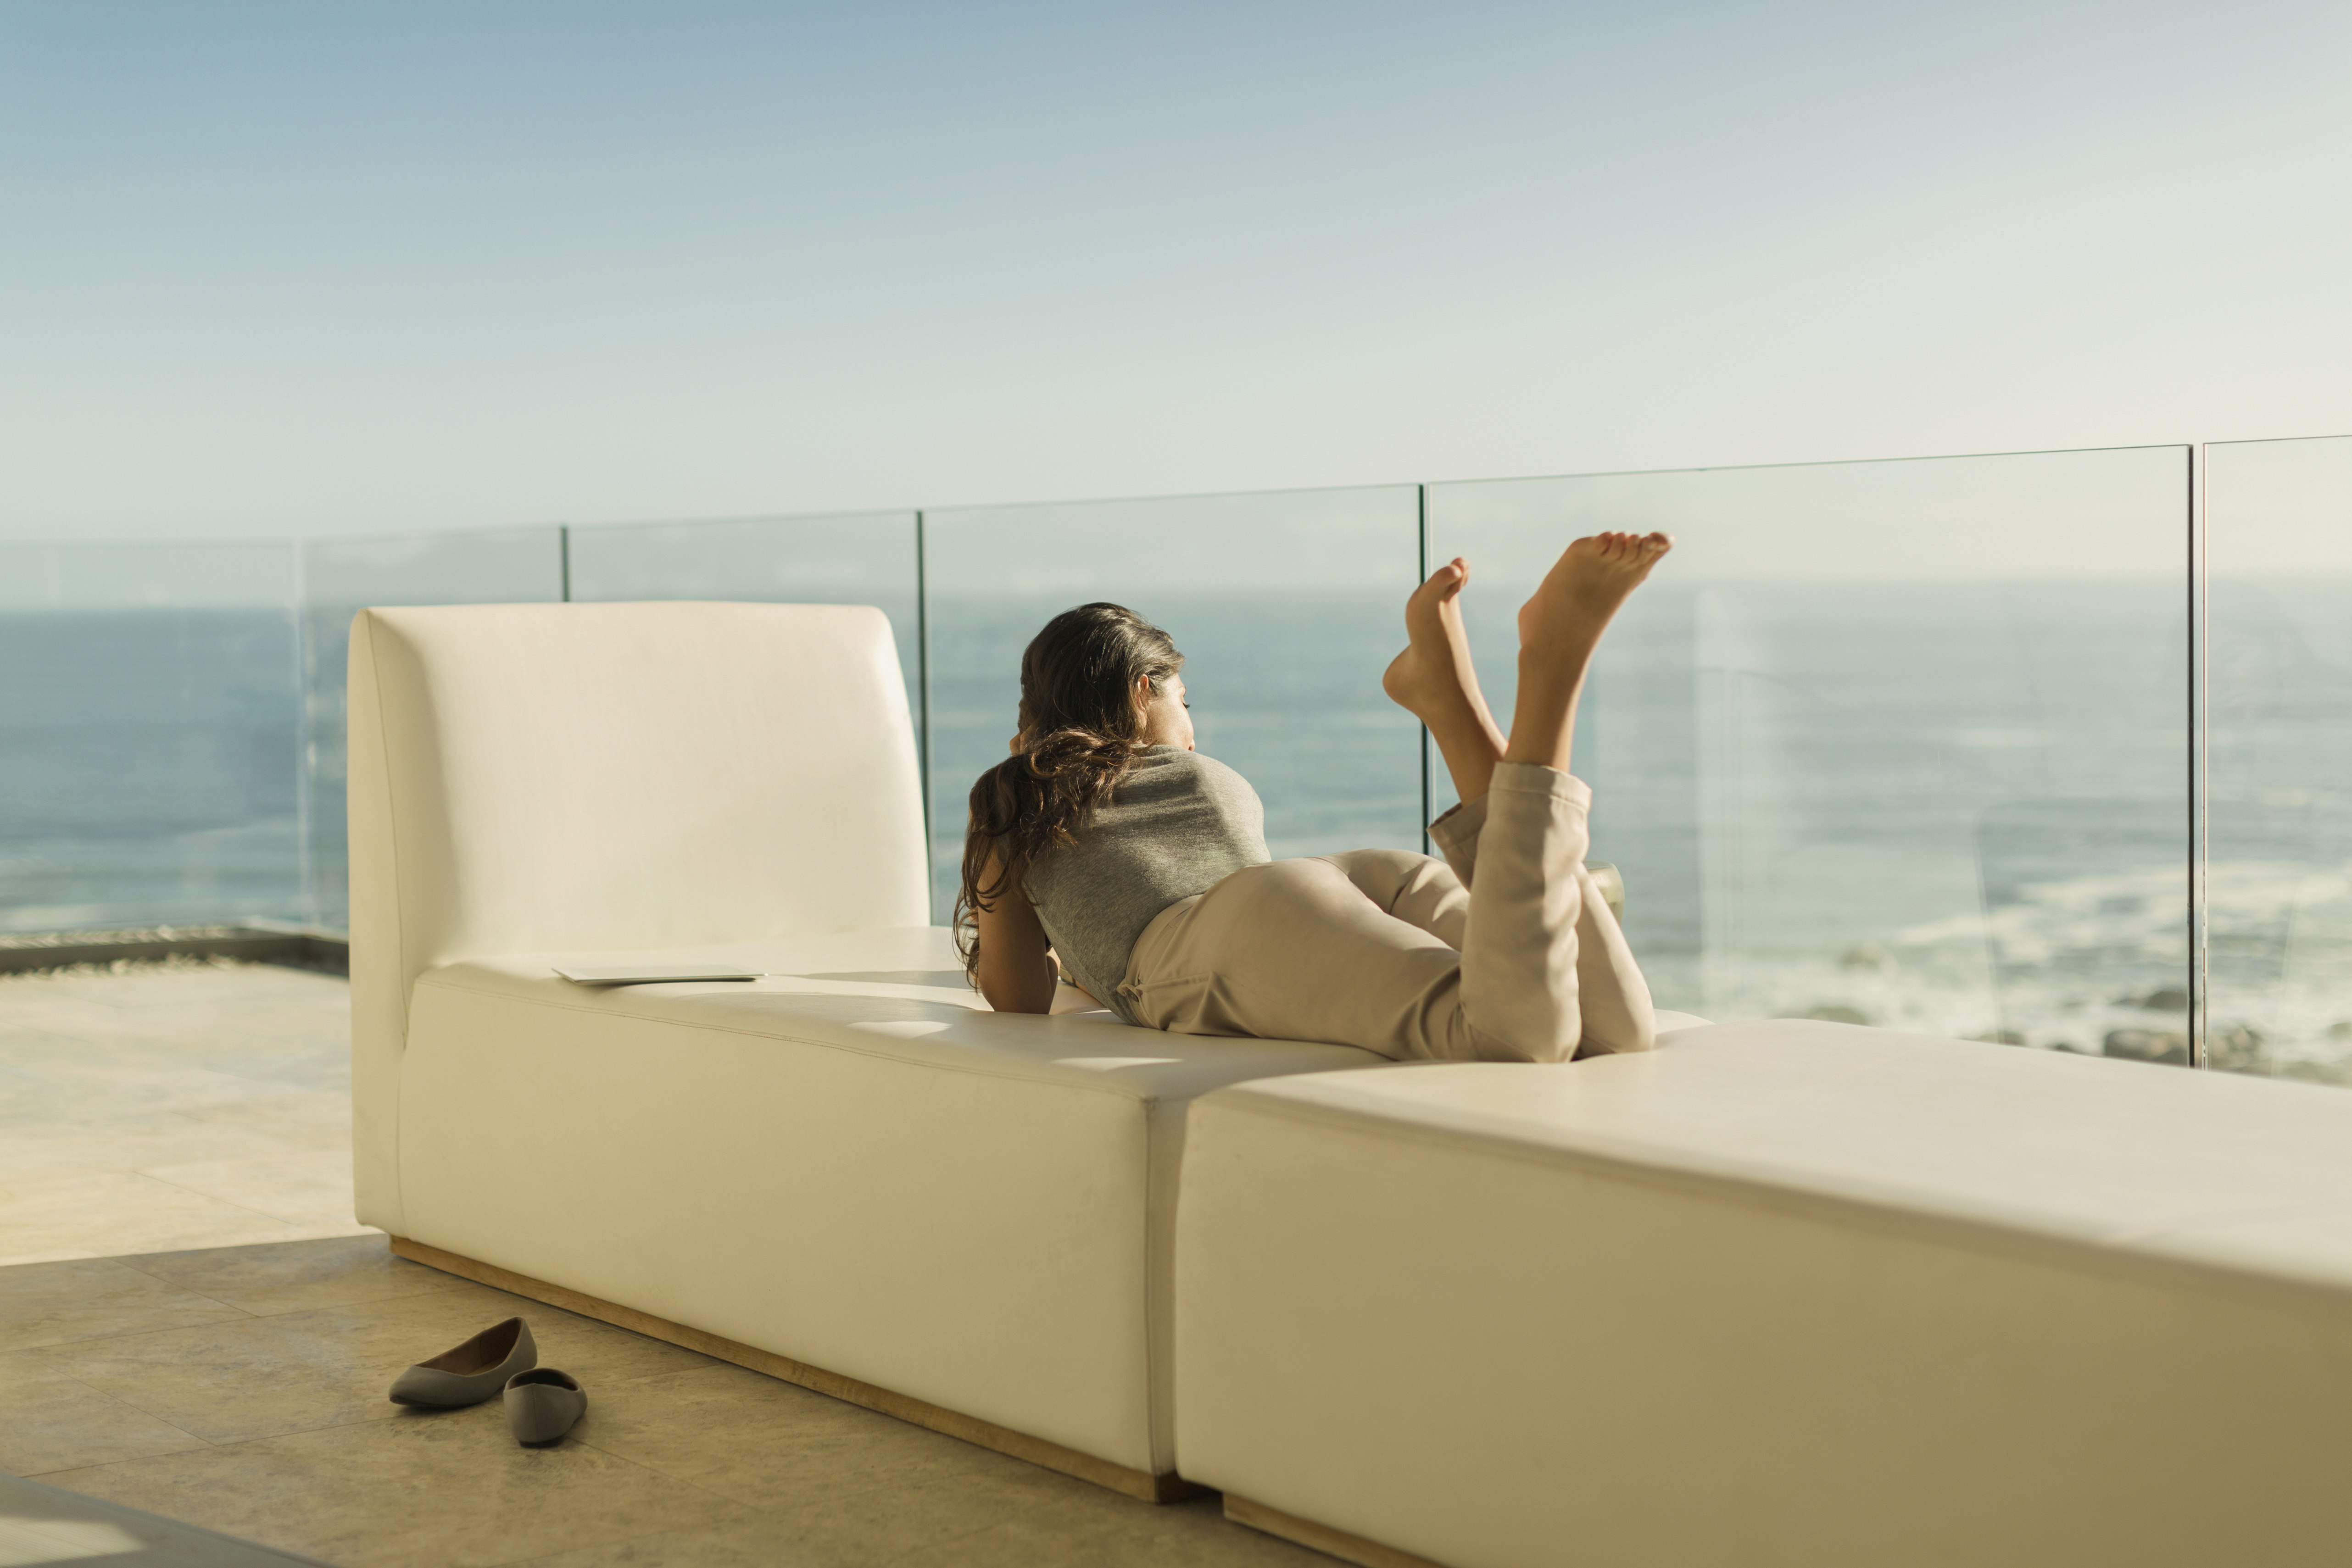 A woman lying on a cream-coloured sofa, her shoes on the floor; the setting is a glass-sided balcony on the edge of the coast, with the ocean in full view.